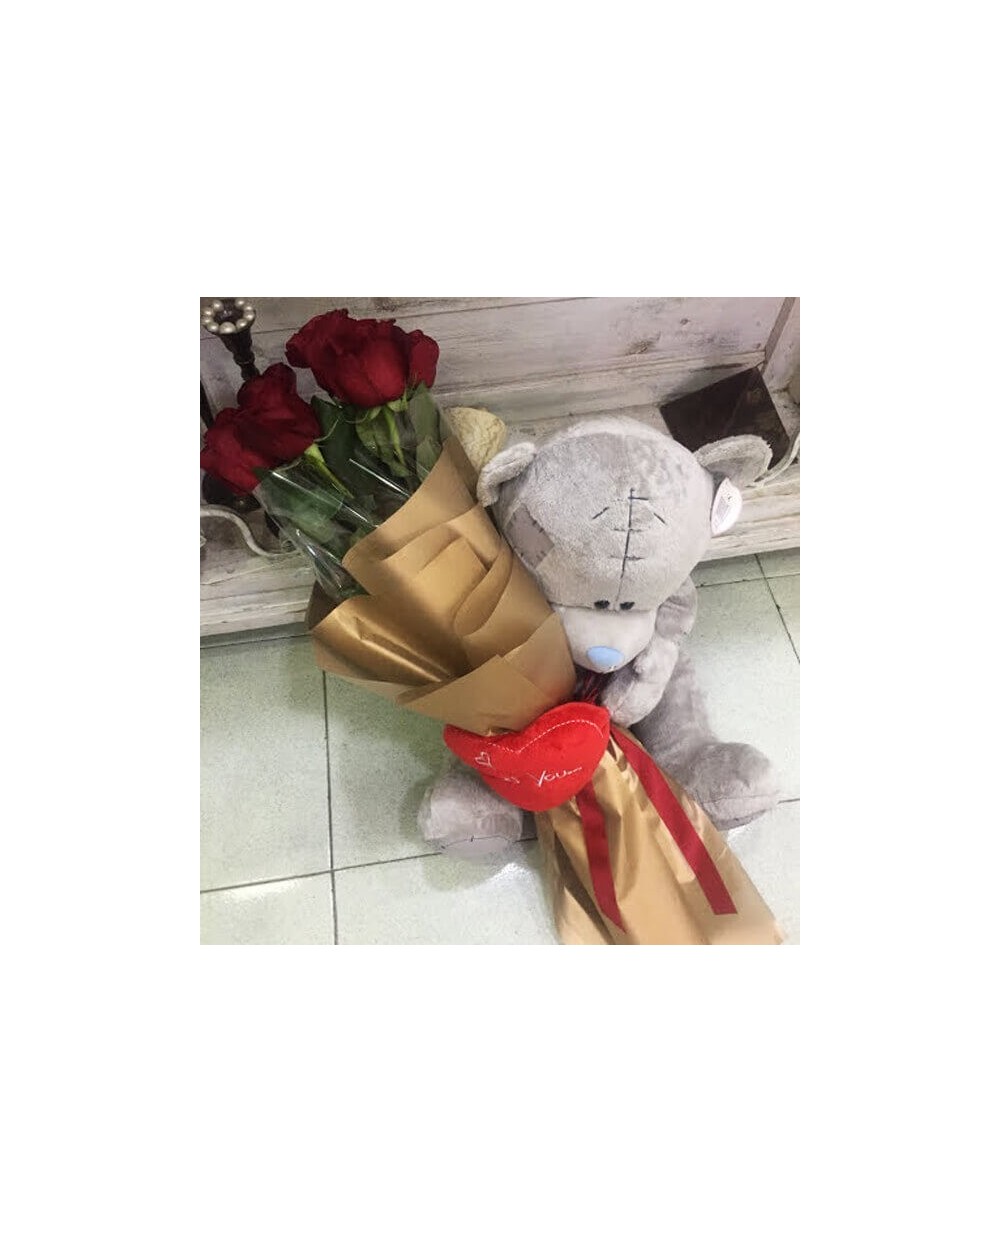 9 Roses Large Teddy